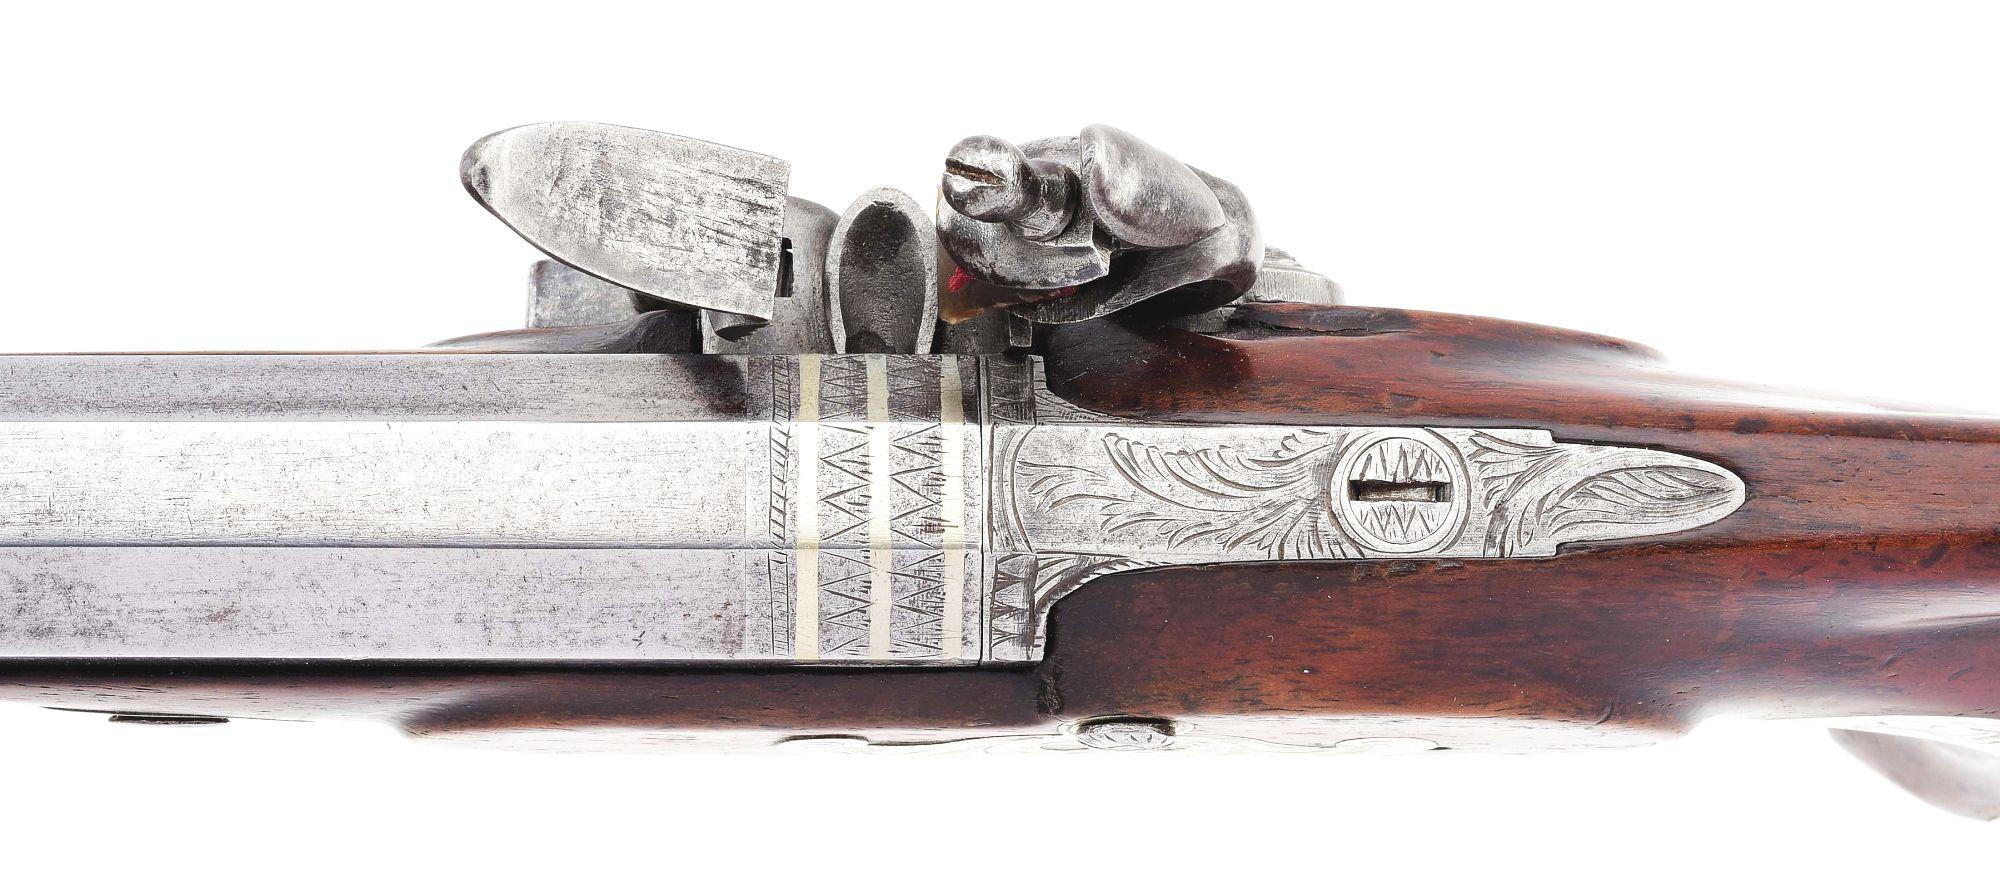 (A) AMERICAN SILVER MOUNTED SAW HANDLE FLINTLOCK DUELING OR TARGET PISTOL BY H. T. COOPER.